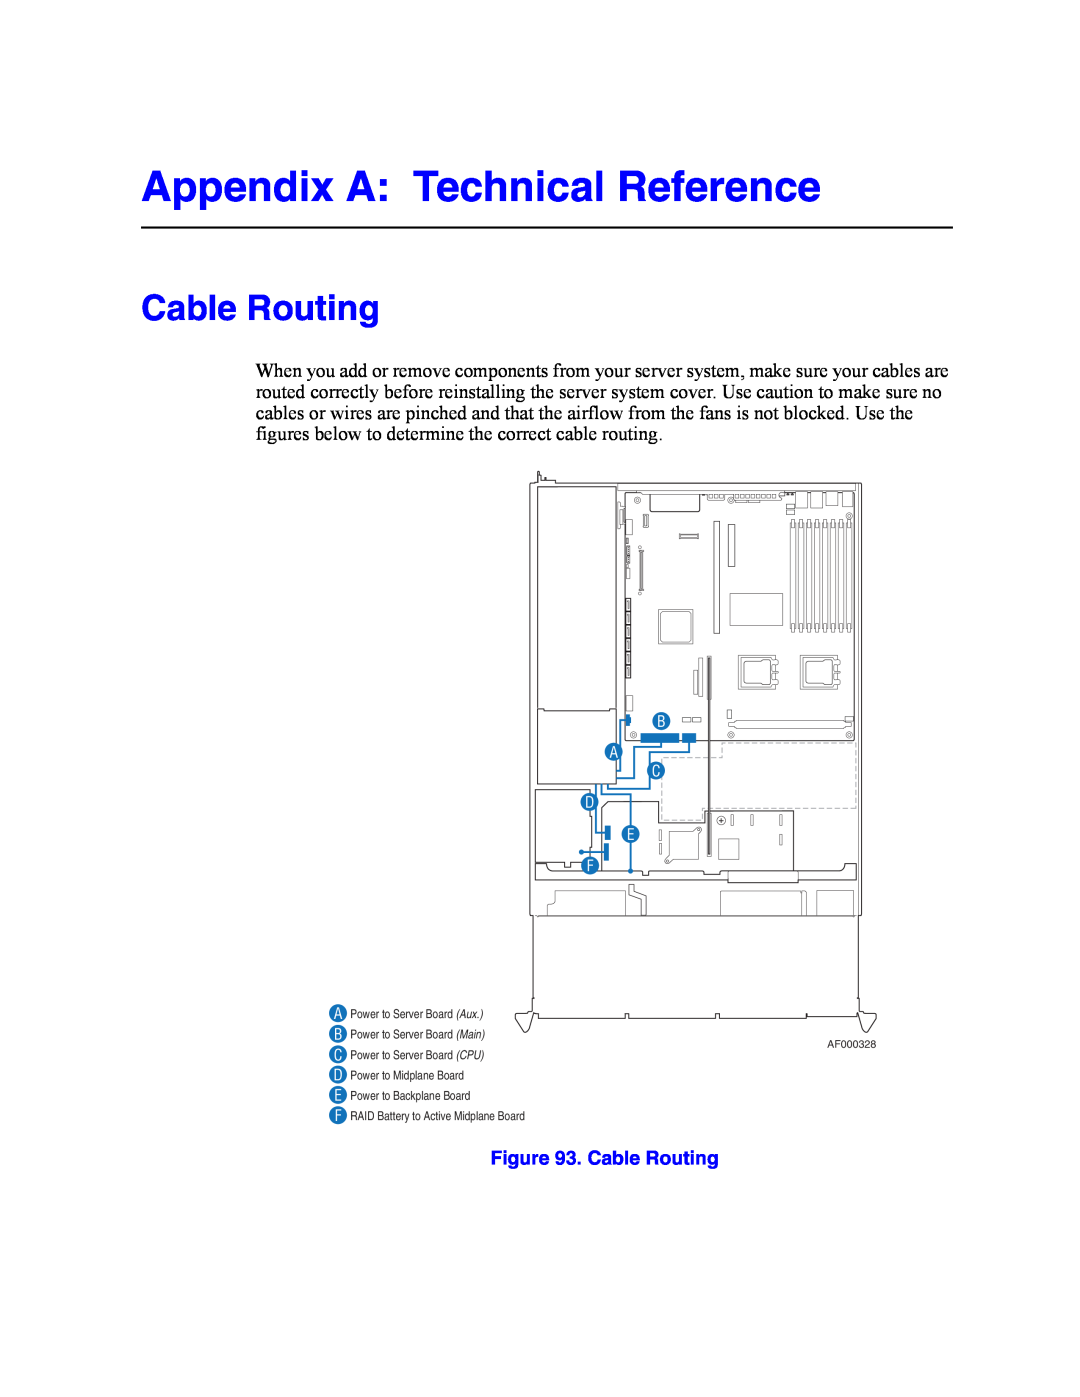 Intel SR2500AL manual Appendix A Technical Reference, Cable Routing 